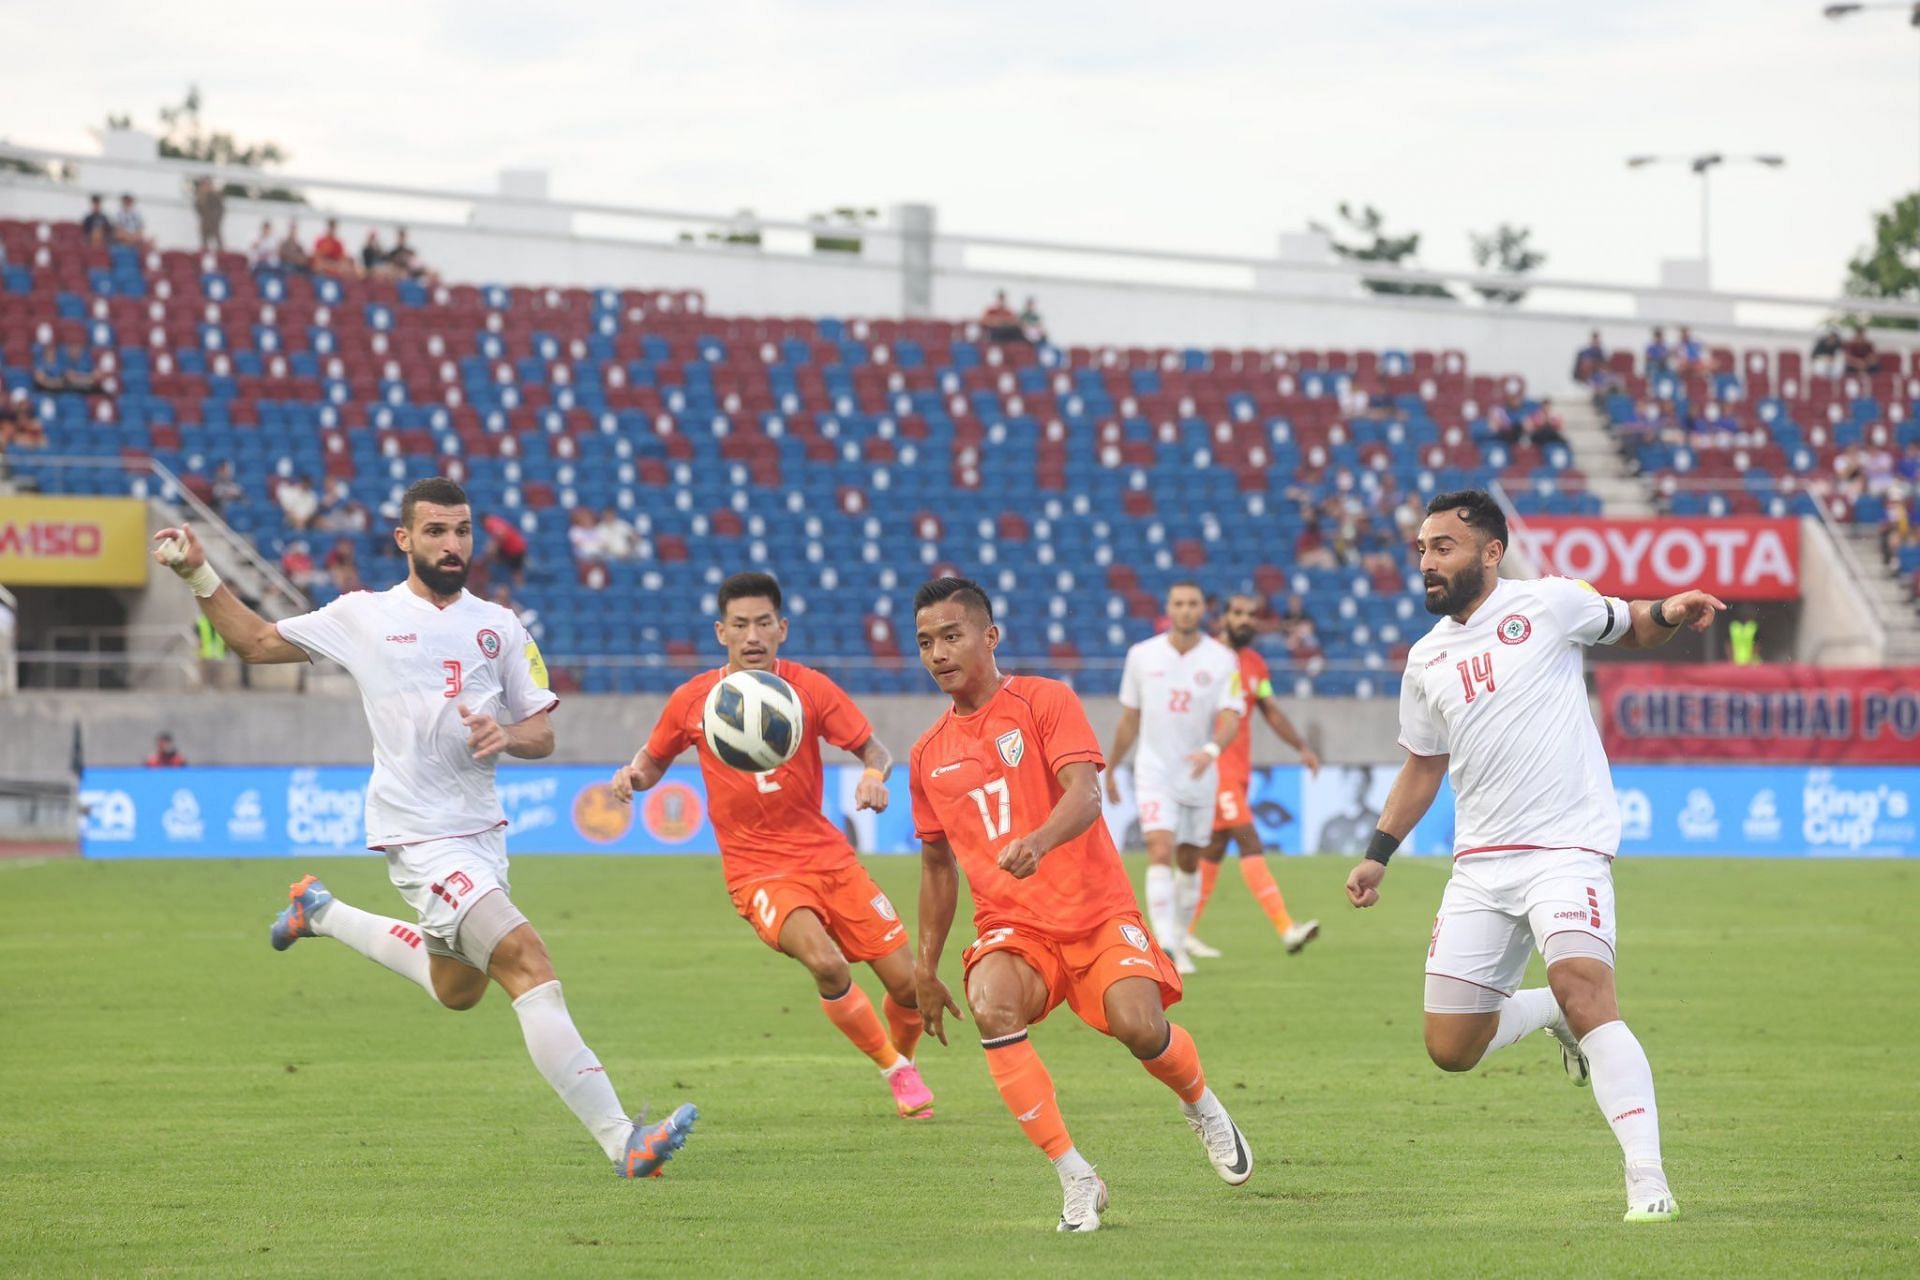 India in action against Lebanon in the third-place playoff in the King